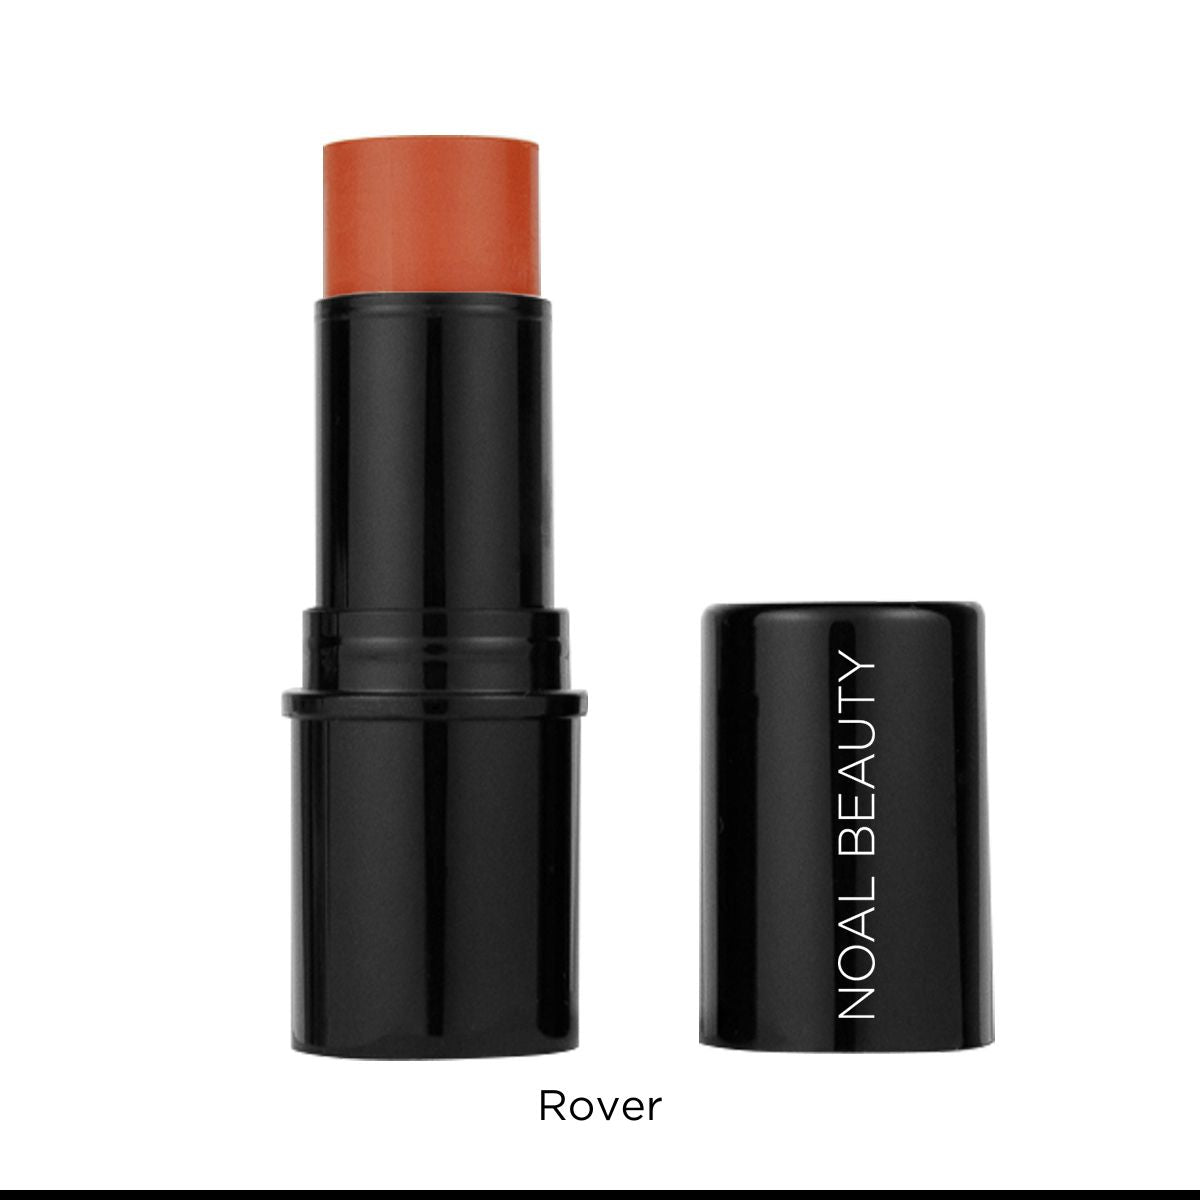 noal-beauty-rover-stick-3-in-1-color-stick-lips-eyes-cheeks-2